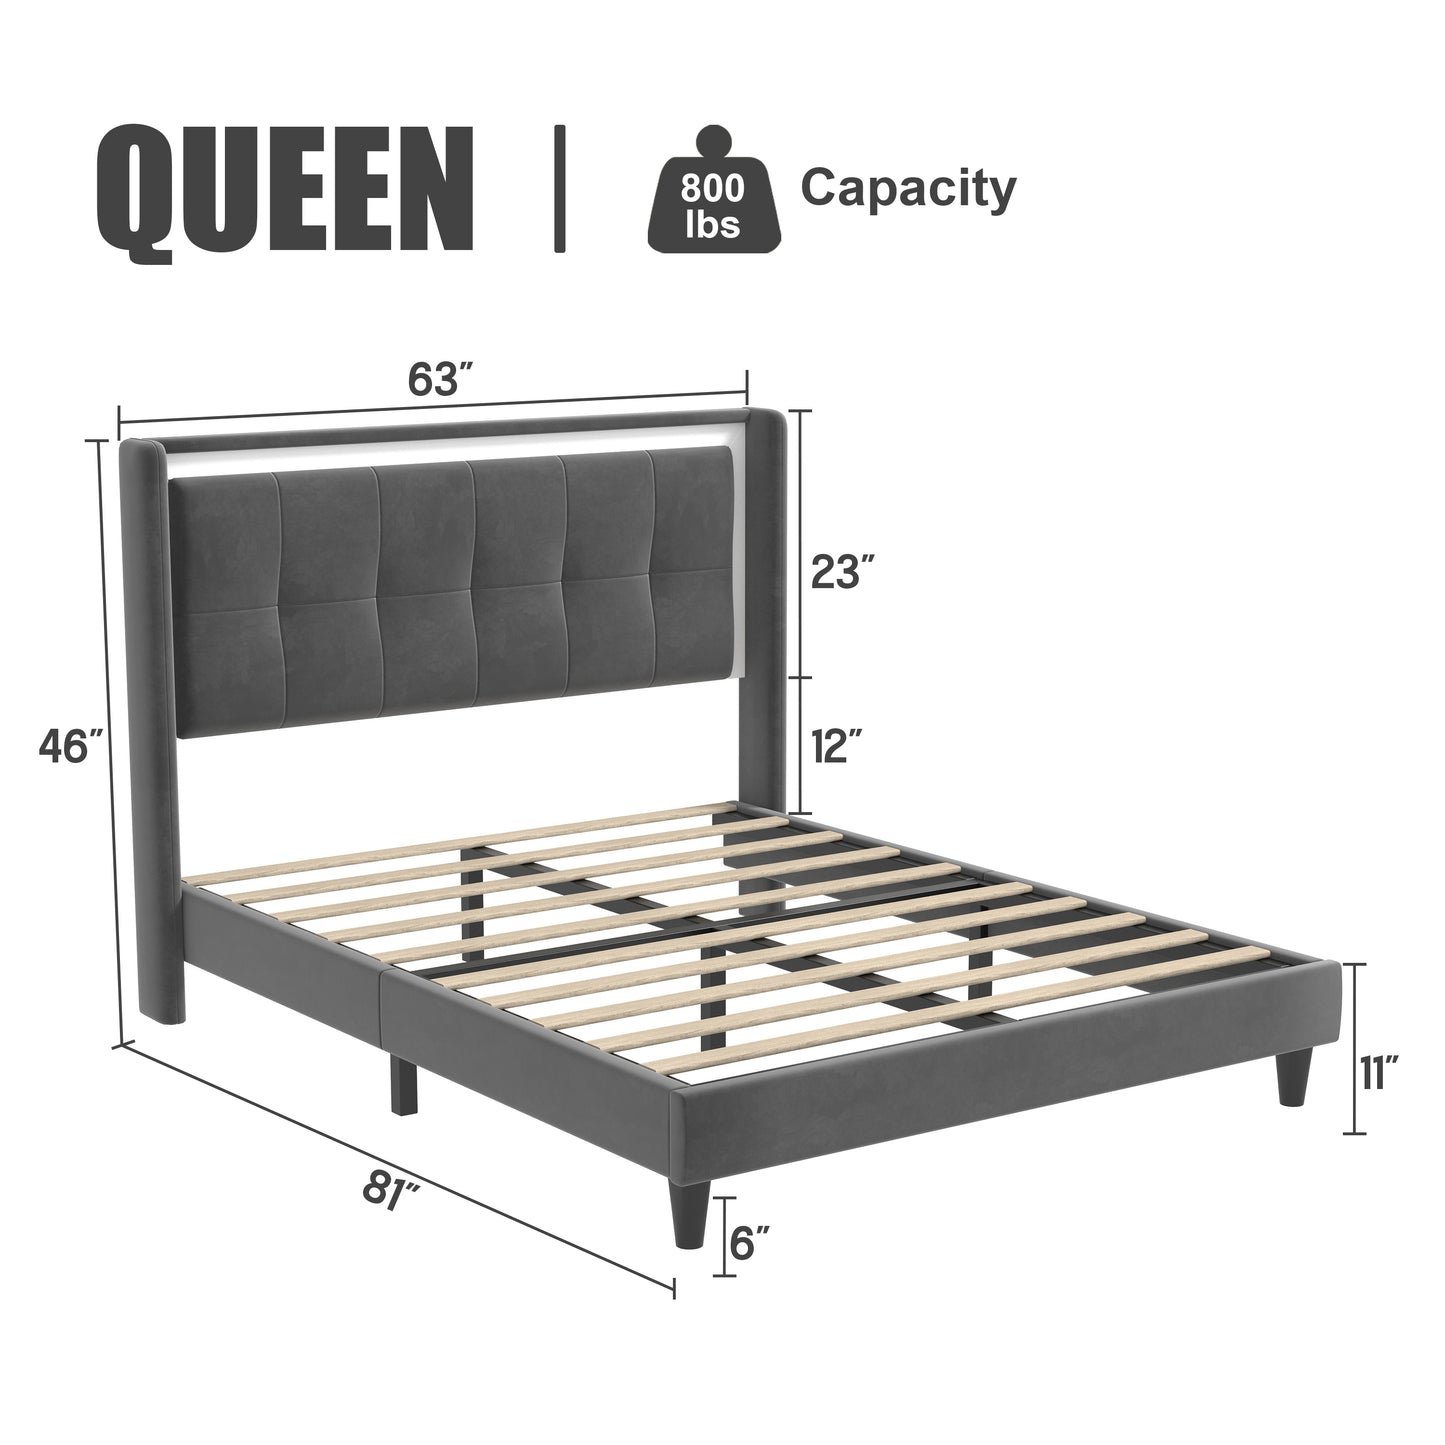 Queen Size Upholstered platform bed frame with headboard and sturdy wooden slats, high load-bearing capacity, non-slip and noiseless, no springs required, easy to assemble, dark gray bed